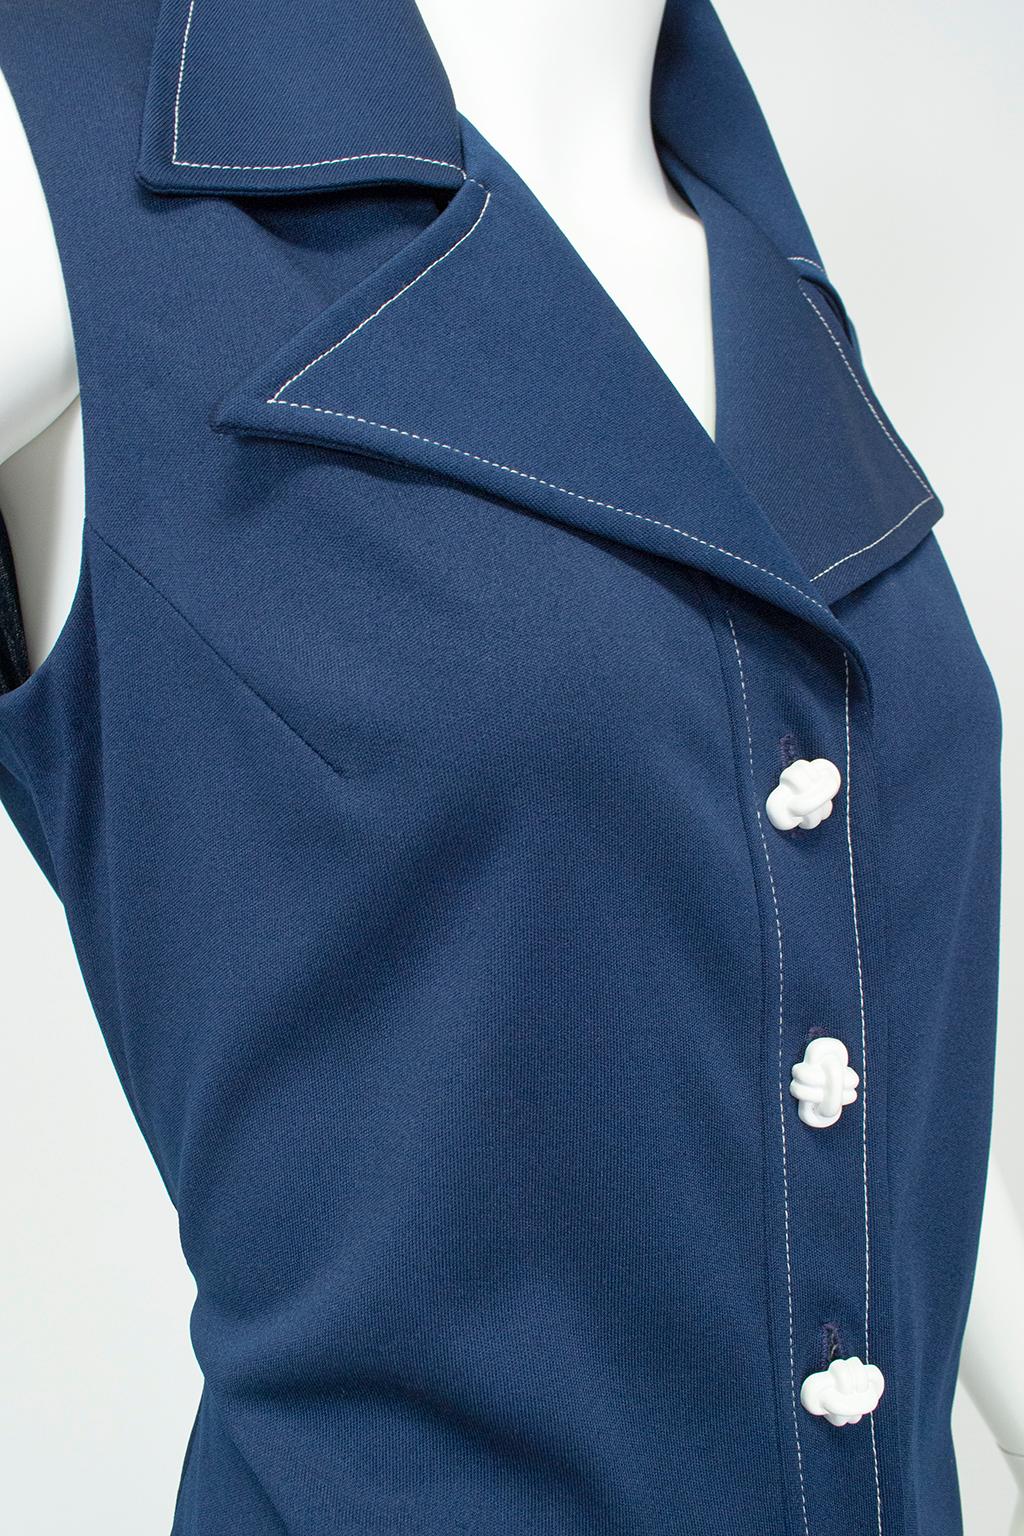 Women's Sleeveless Navy Jersey Sailor Dress with Nautical Buttons – M, 1960s For Sale